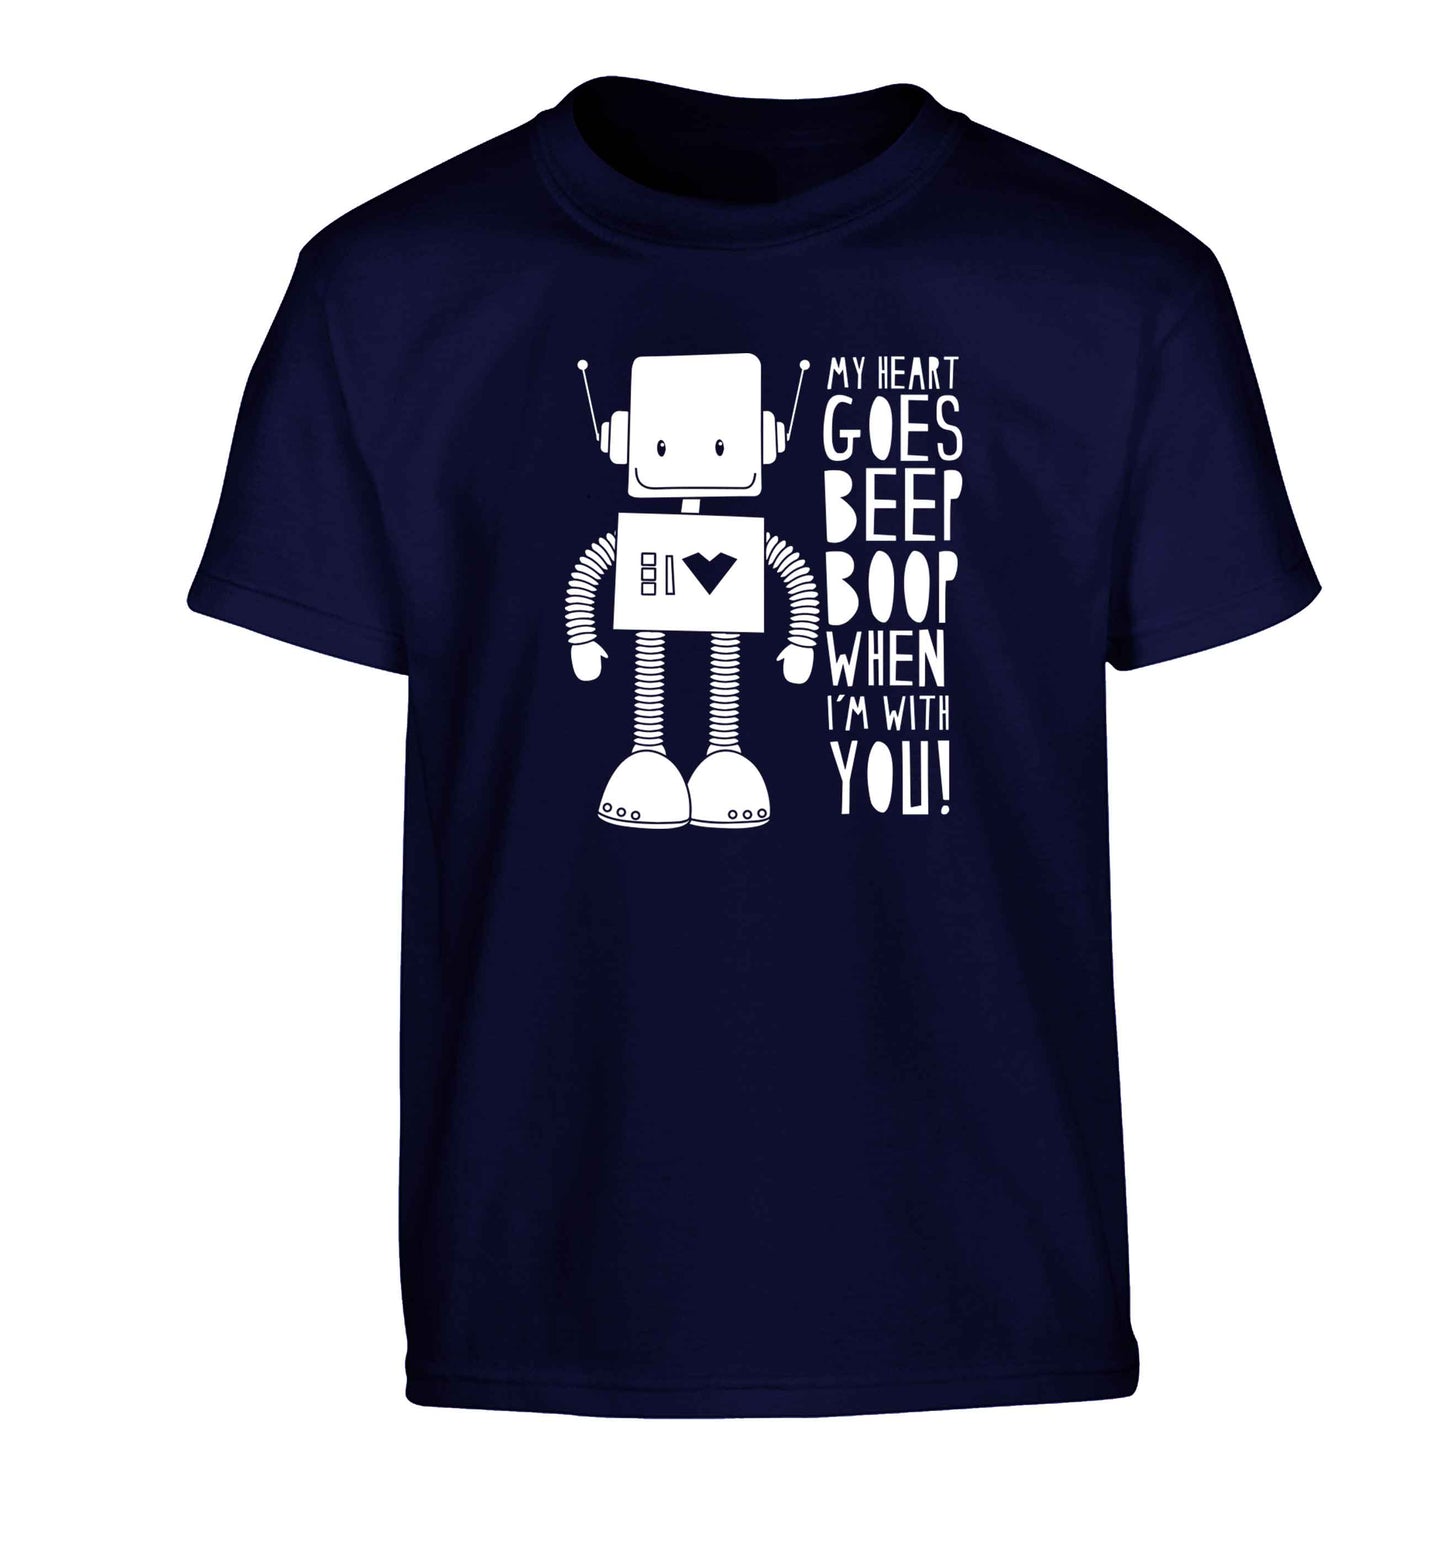 My heart goes beep boop when I'm with you Children's navy Tshirt 12-13 Years